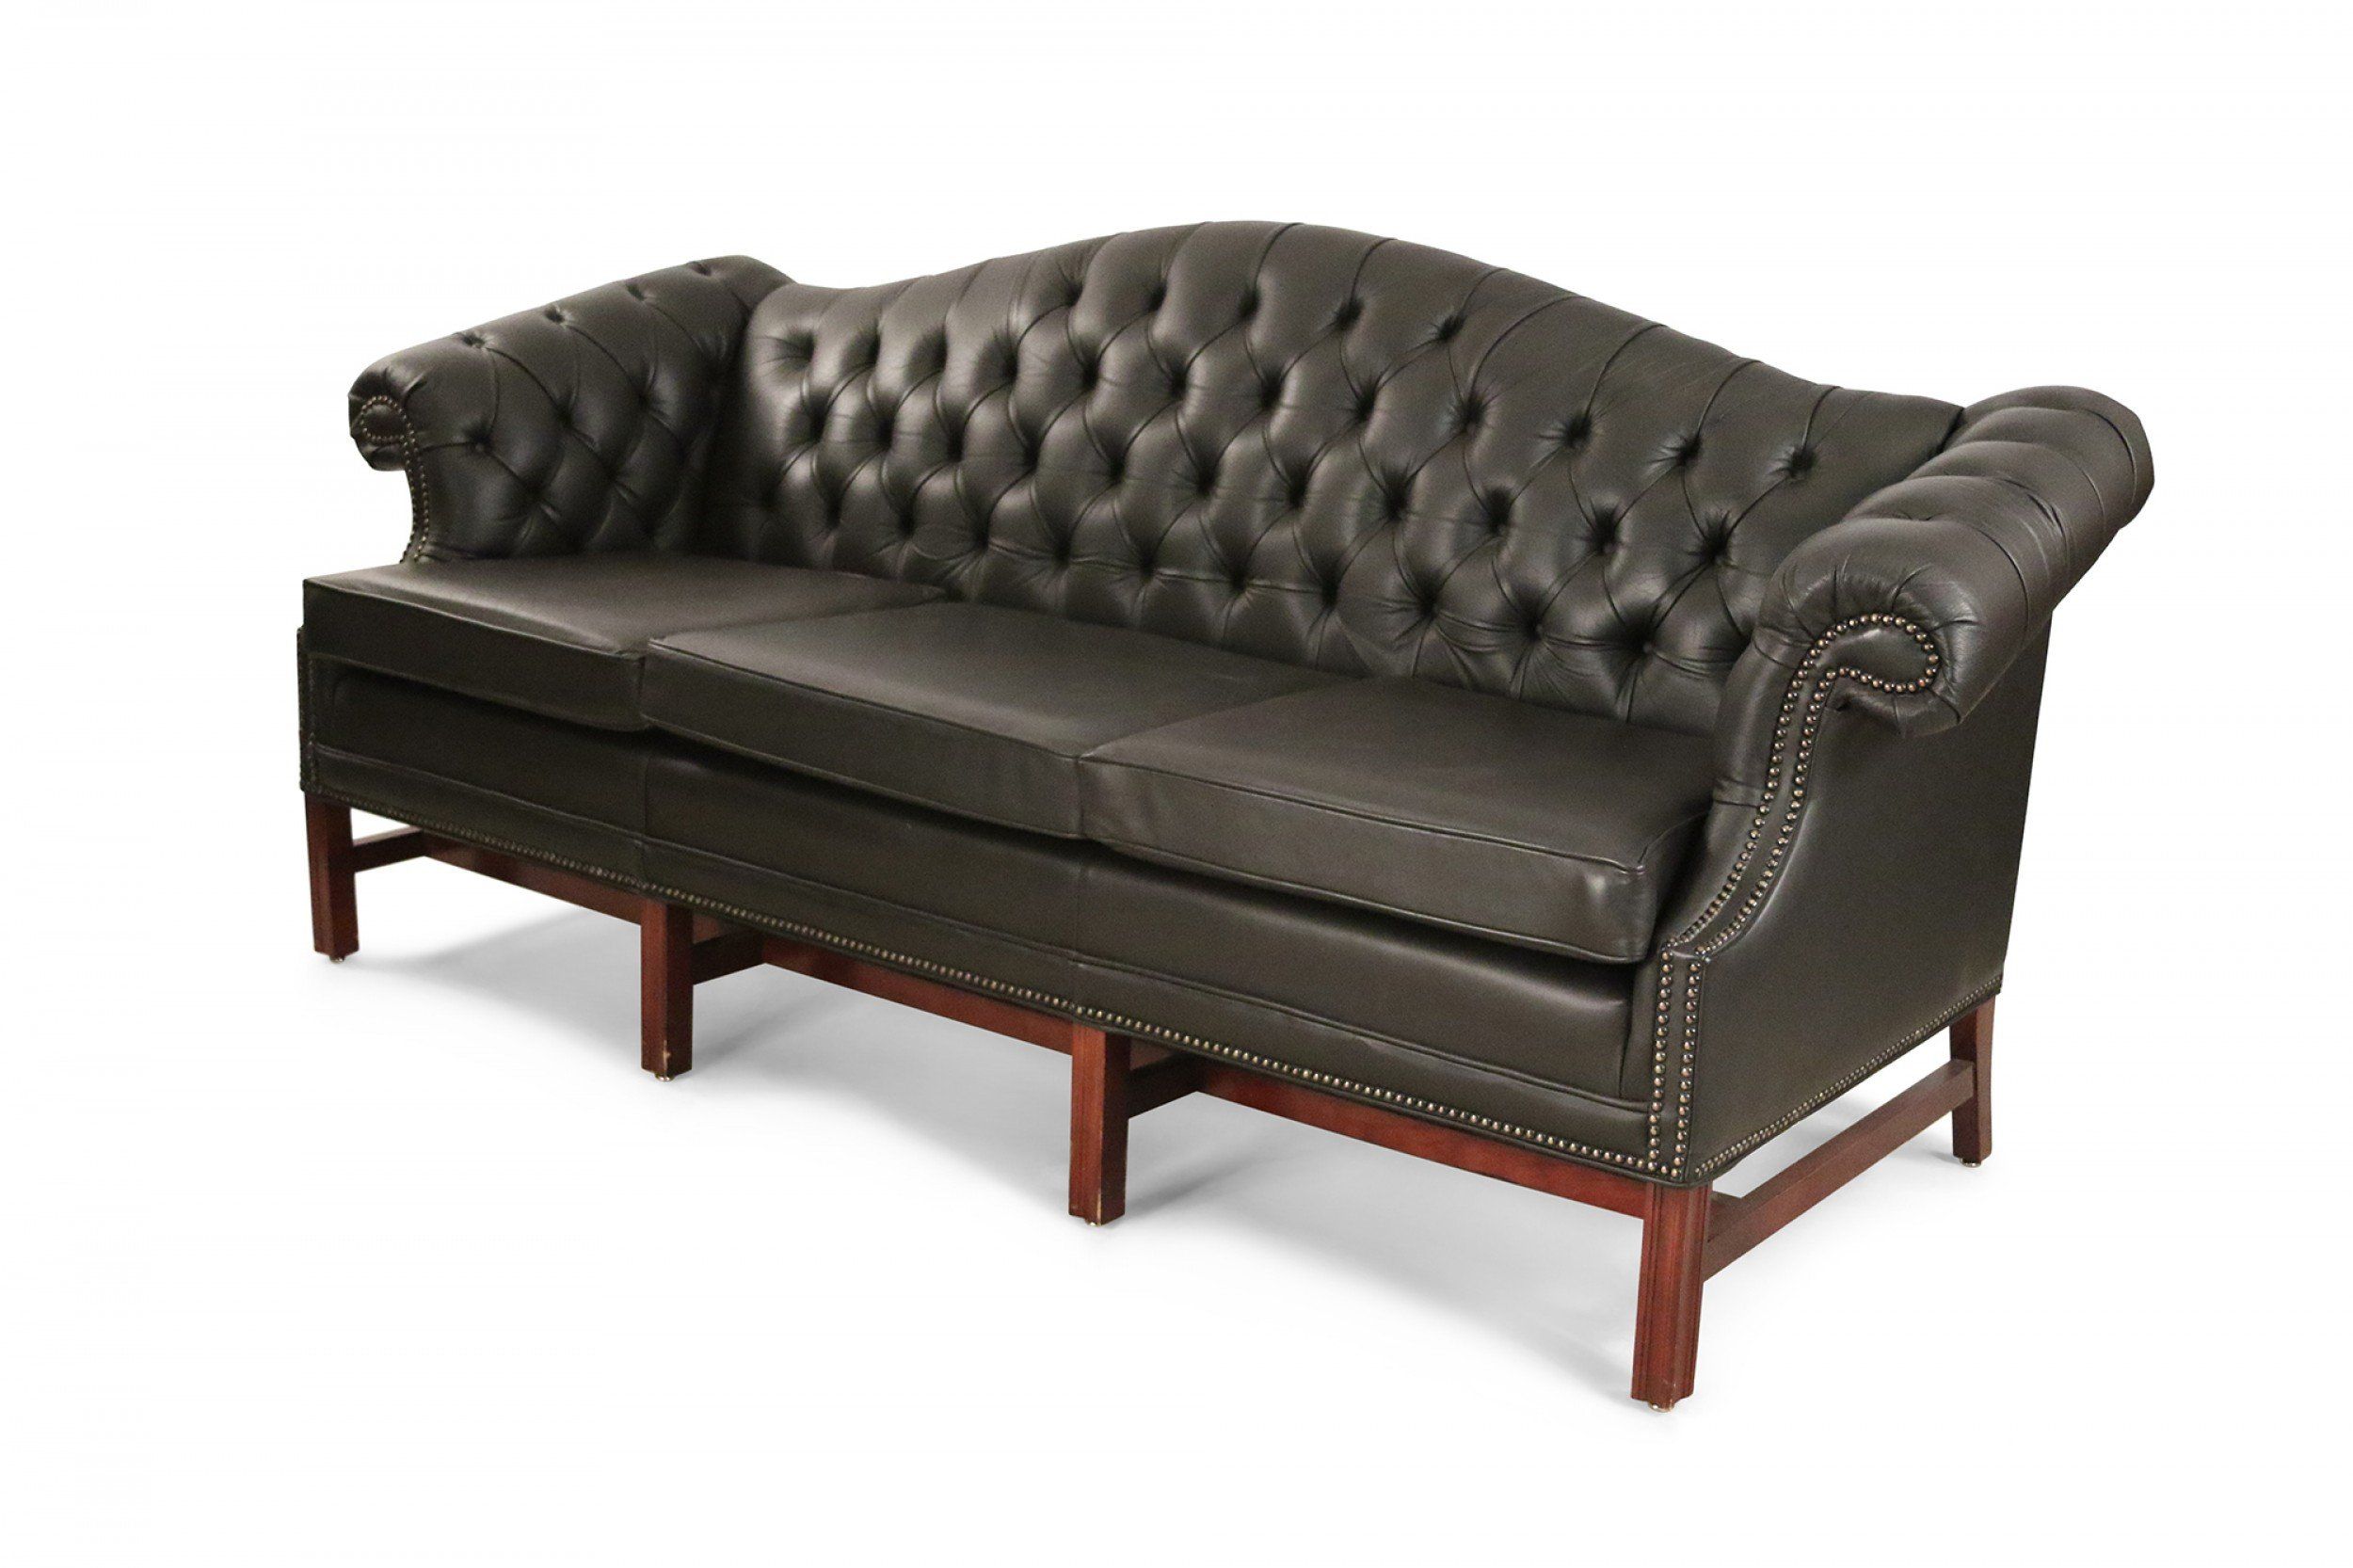 English Victorian Style Camel Back Black Tufted Leather Sofa Regarding Sofas In Black (View 15 of 15)